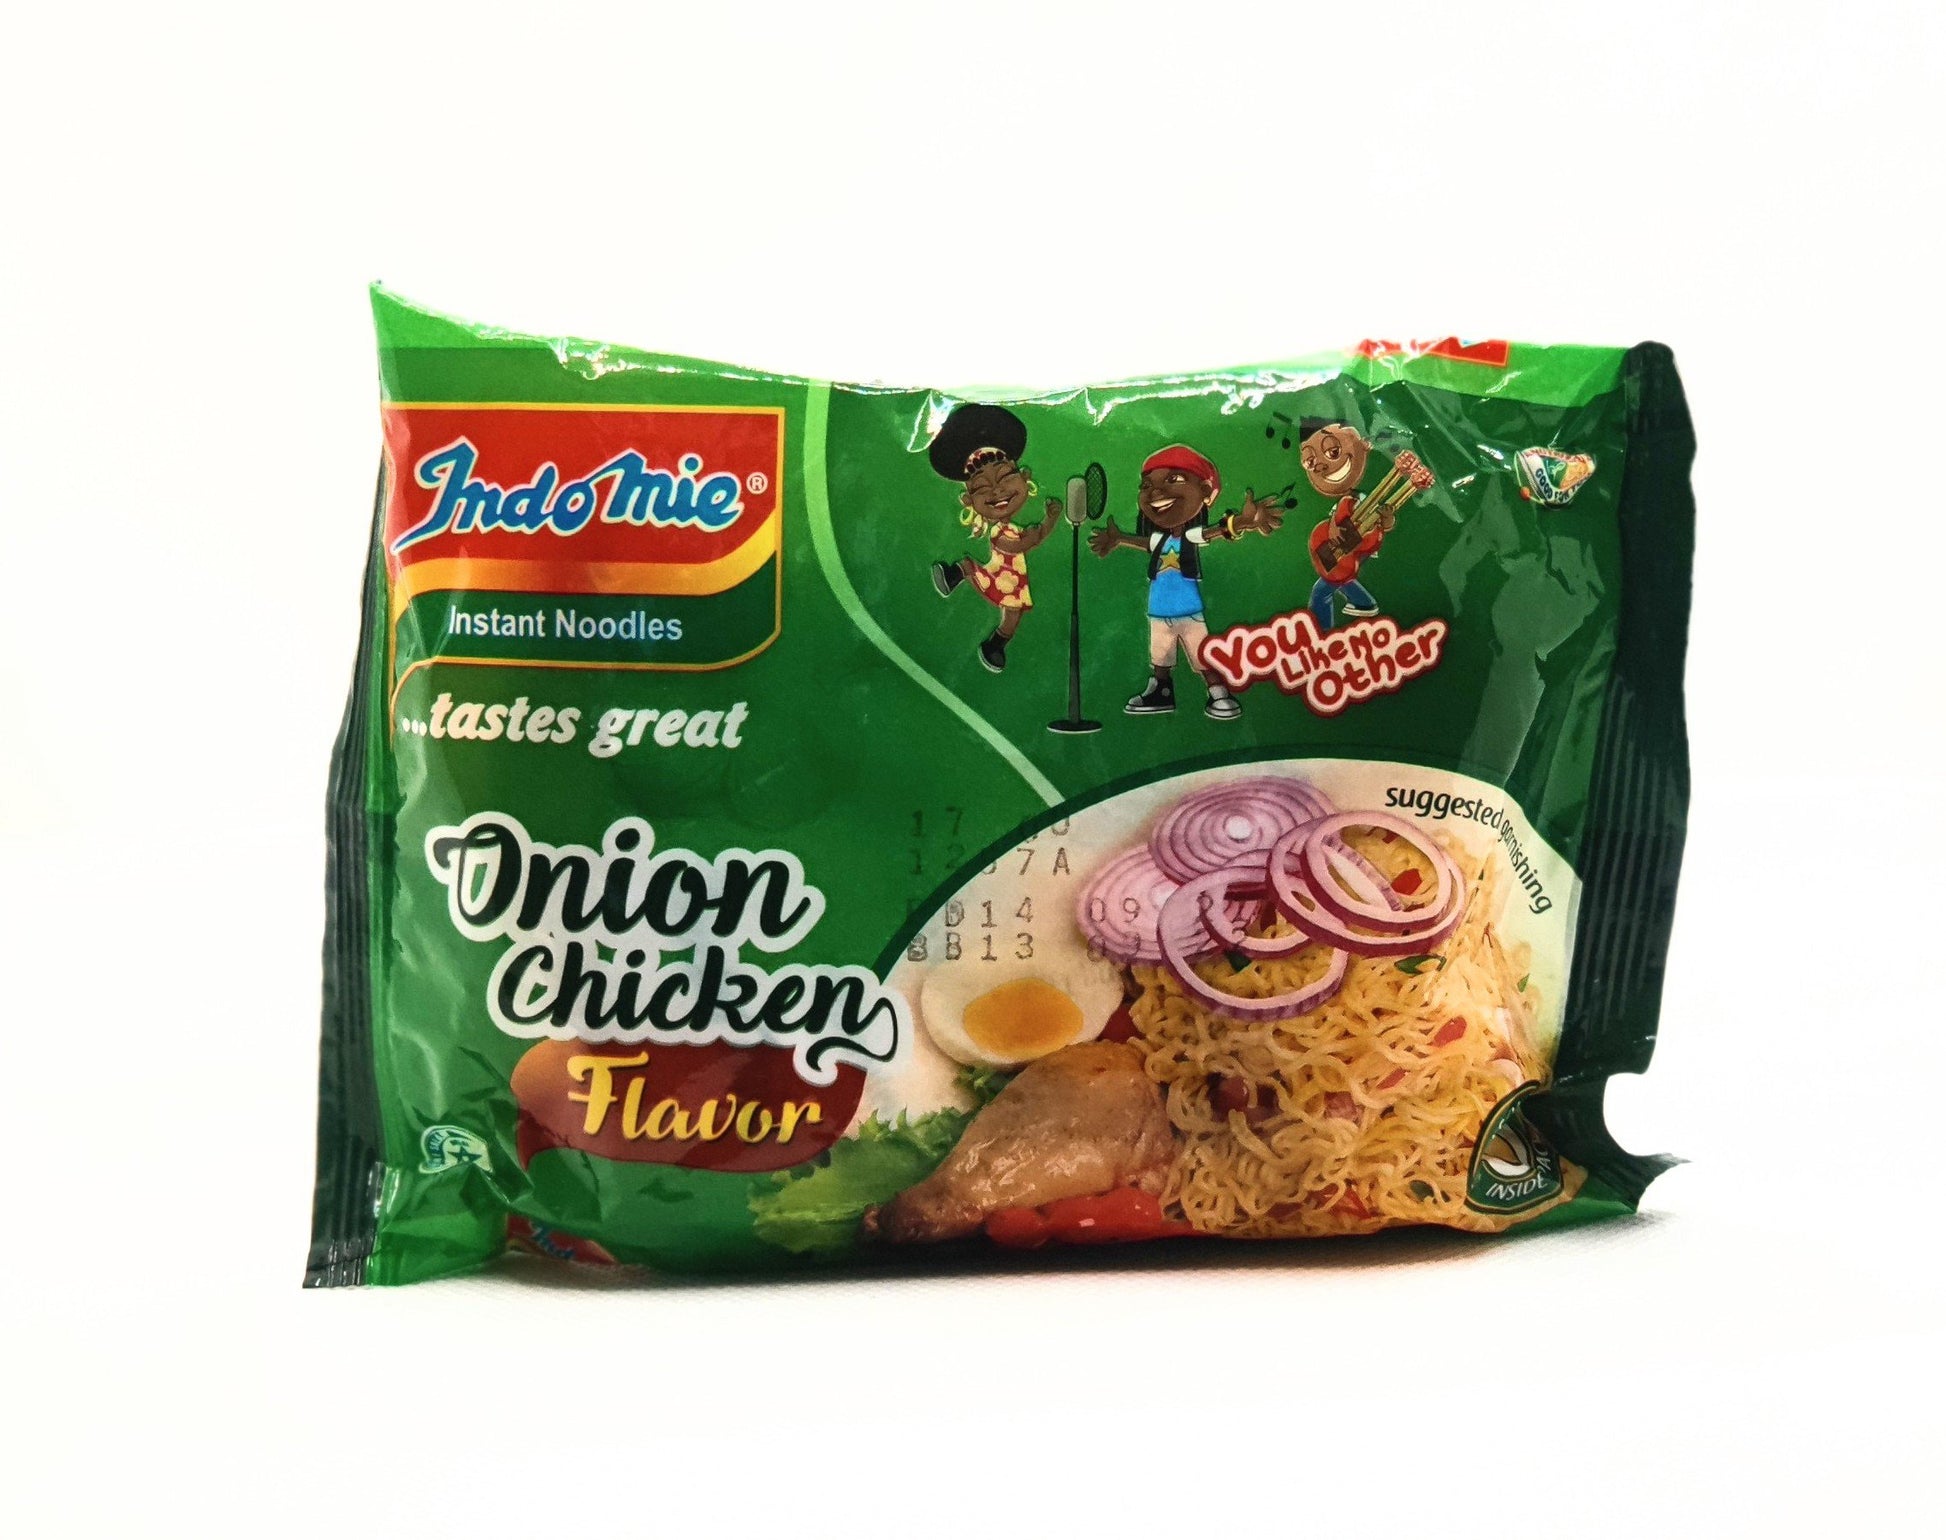 A small pack of indome instant noodles